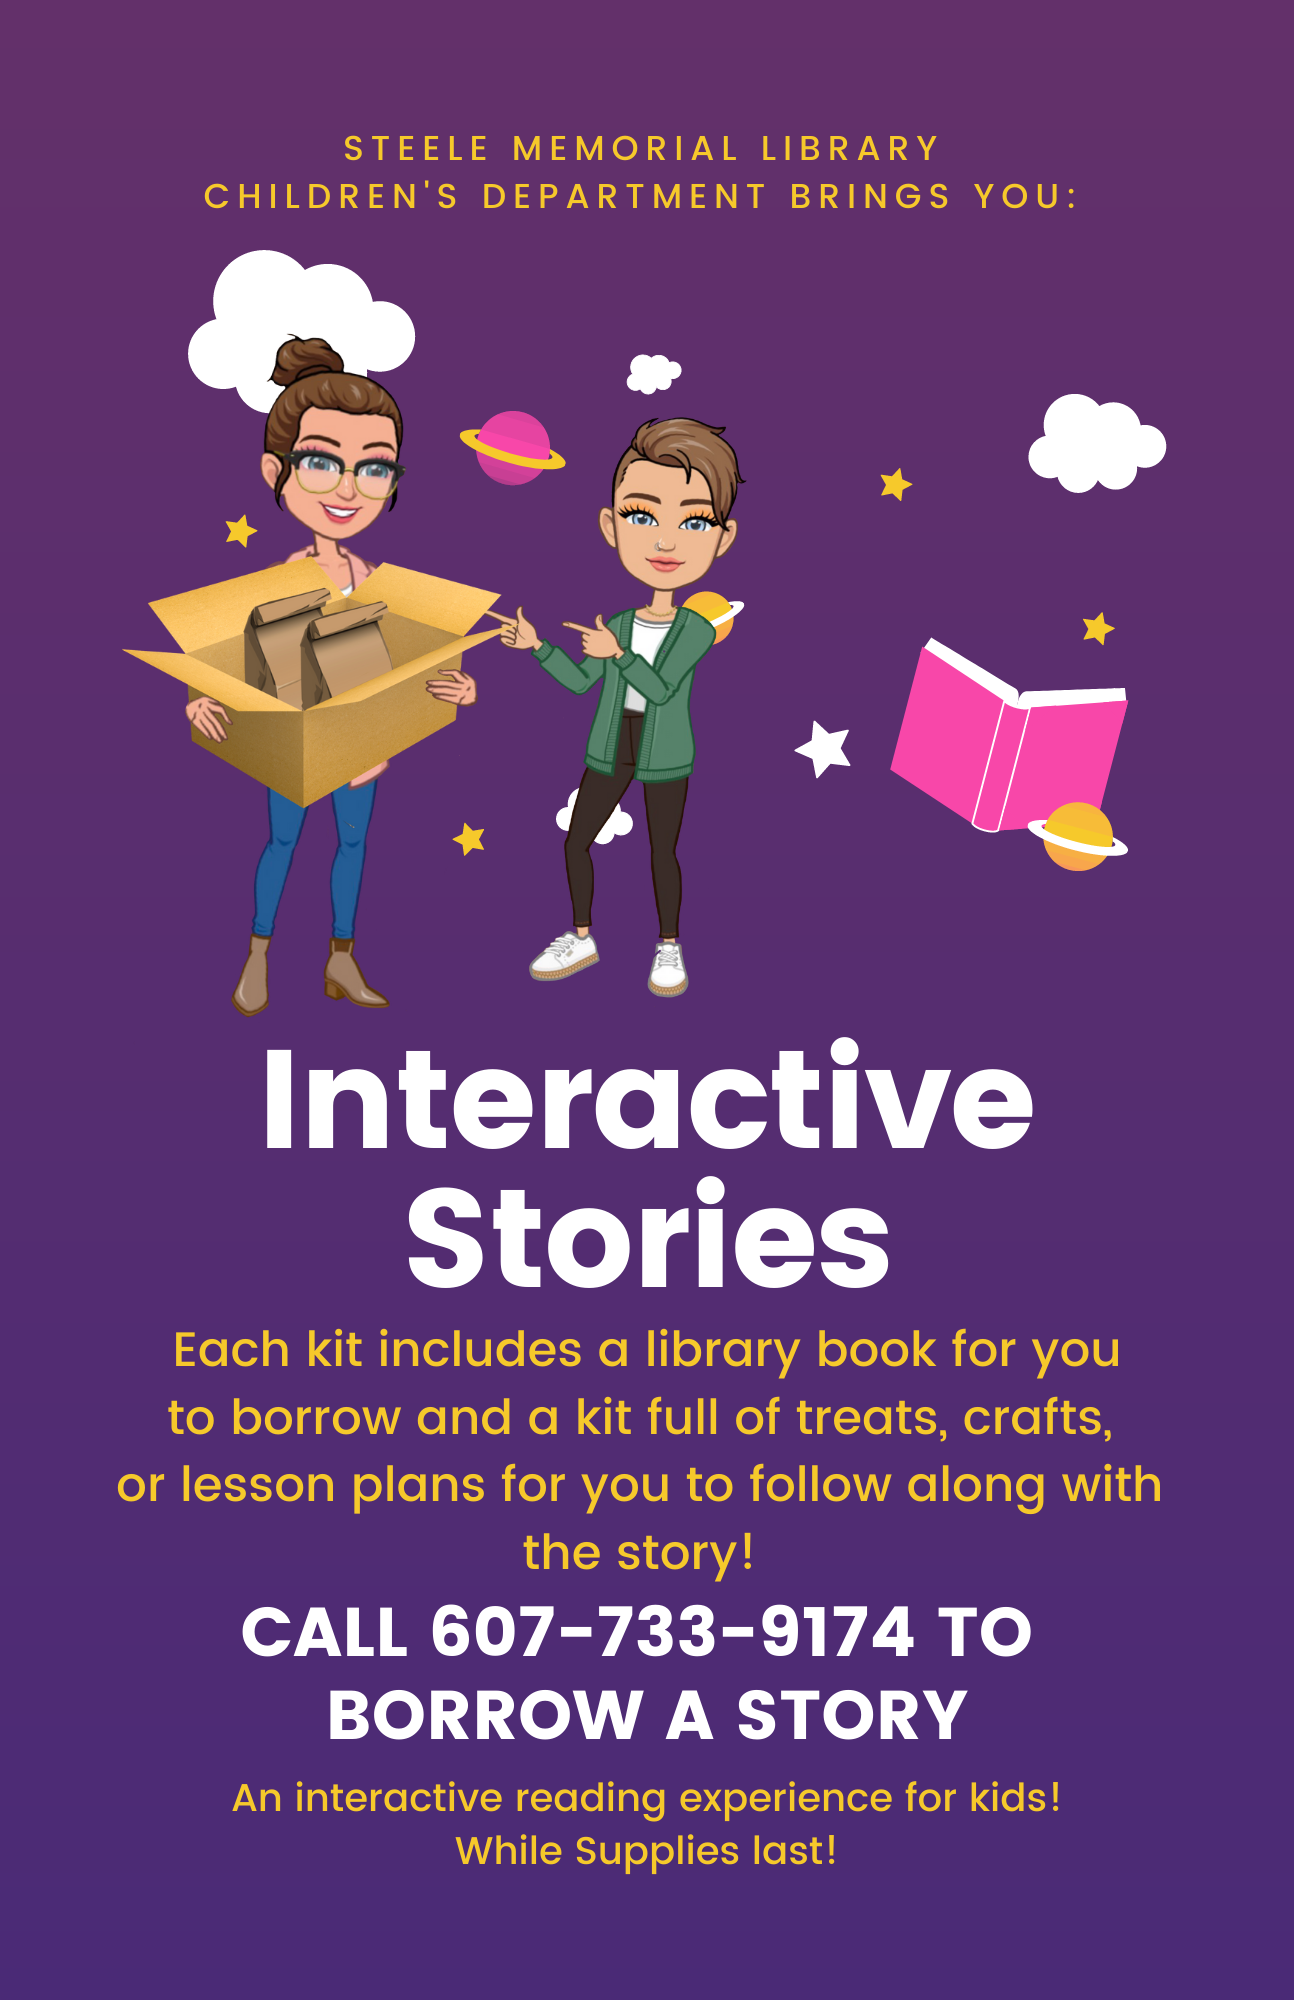 Each kit includes a library book for you to borrow as well as surprises that encourage imaginative play and bring the story to life!

Call to reserve a kit - 607-733-9174